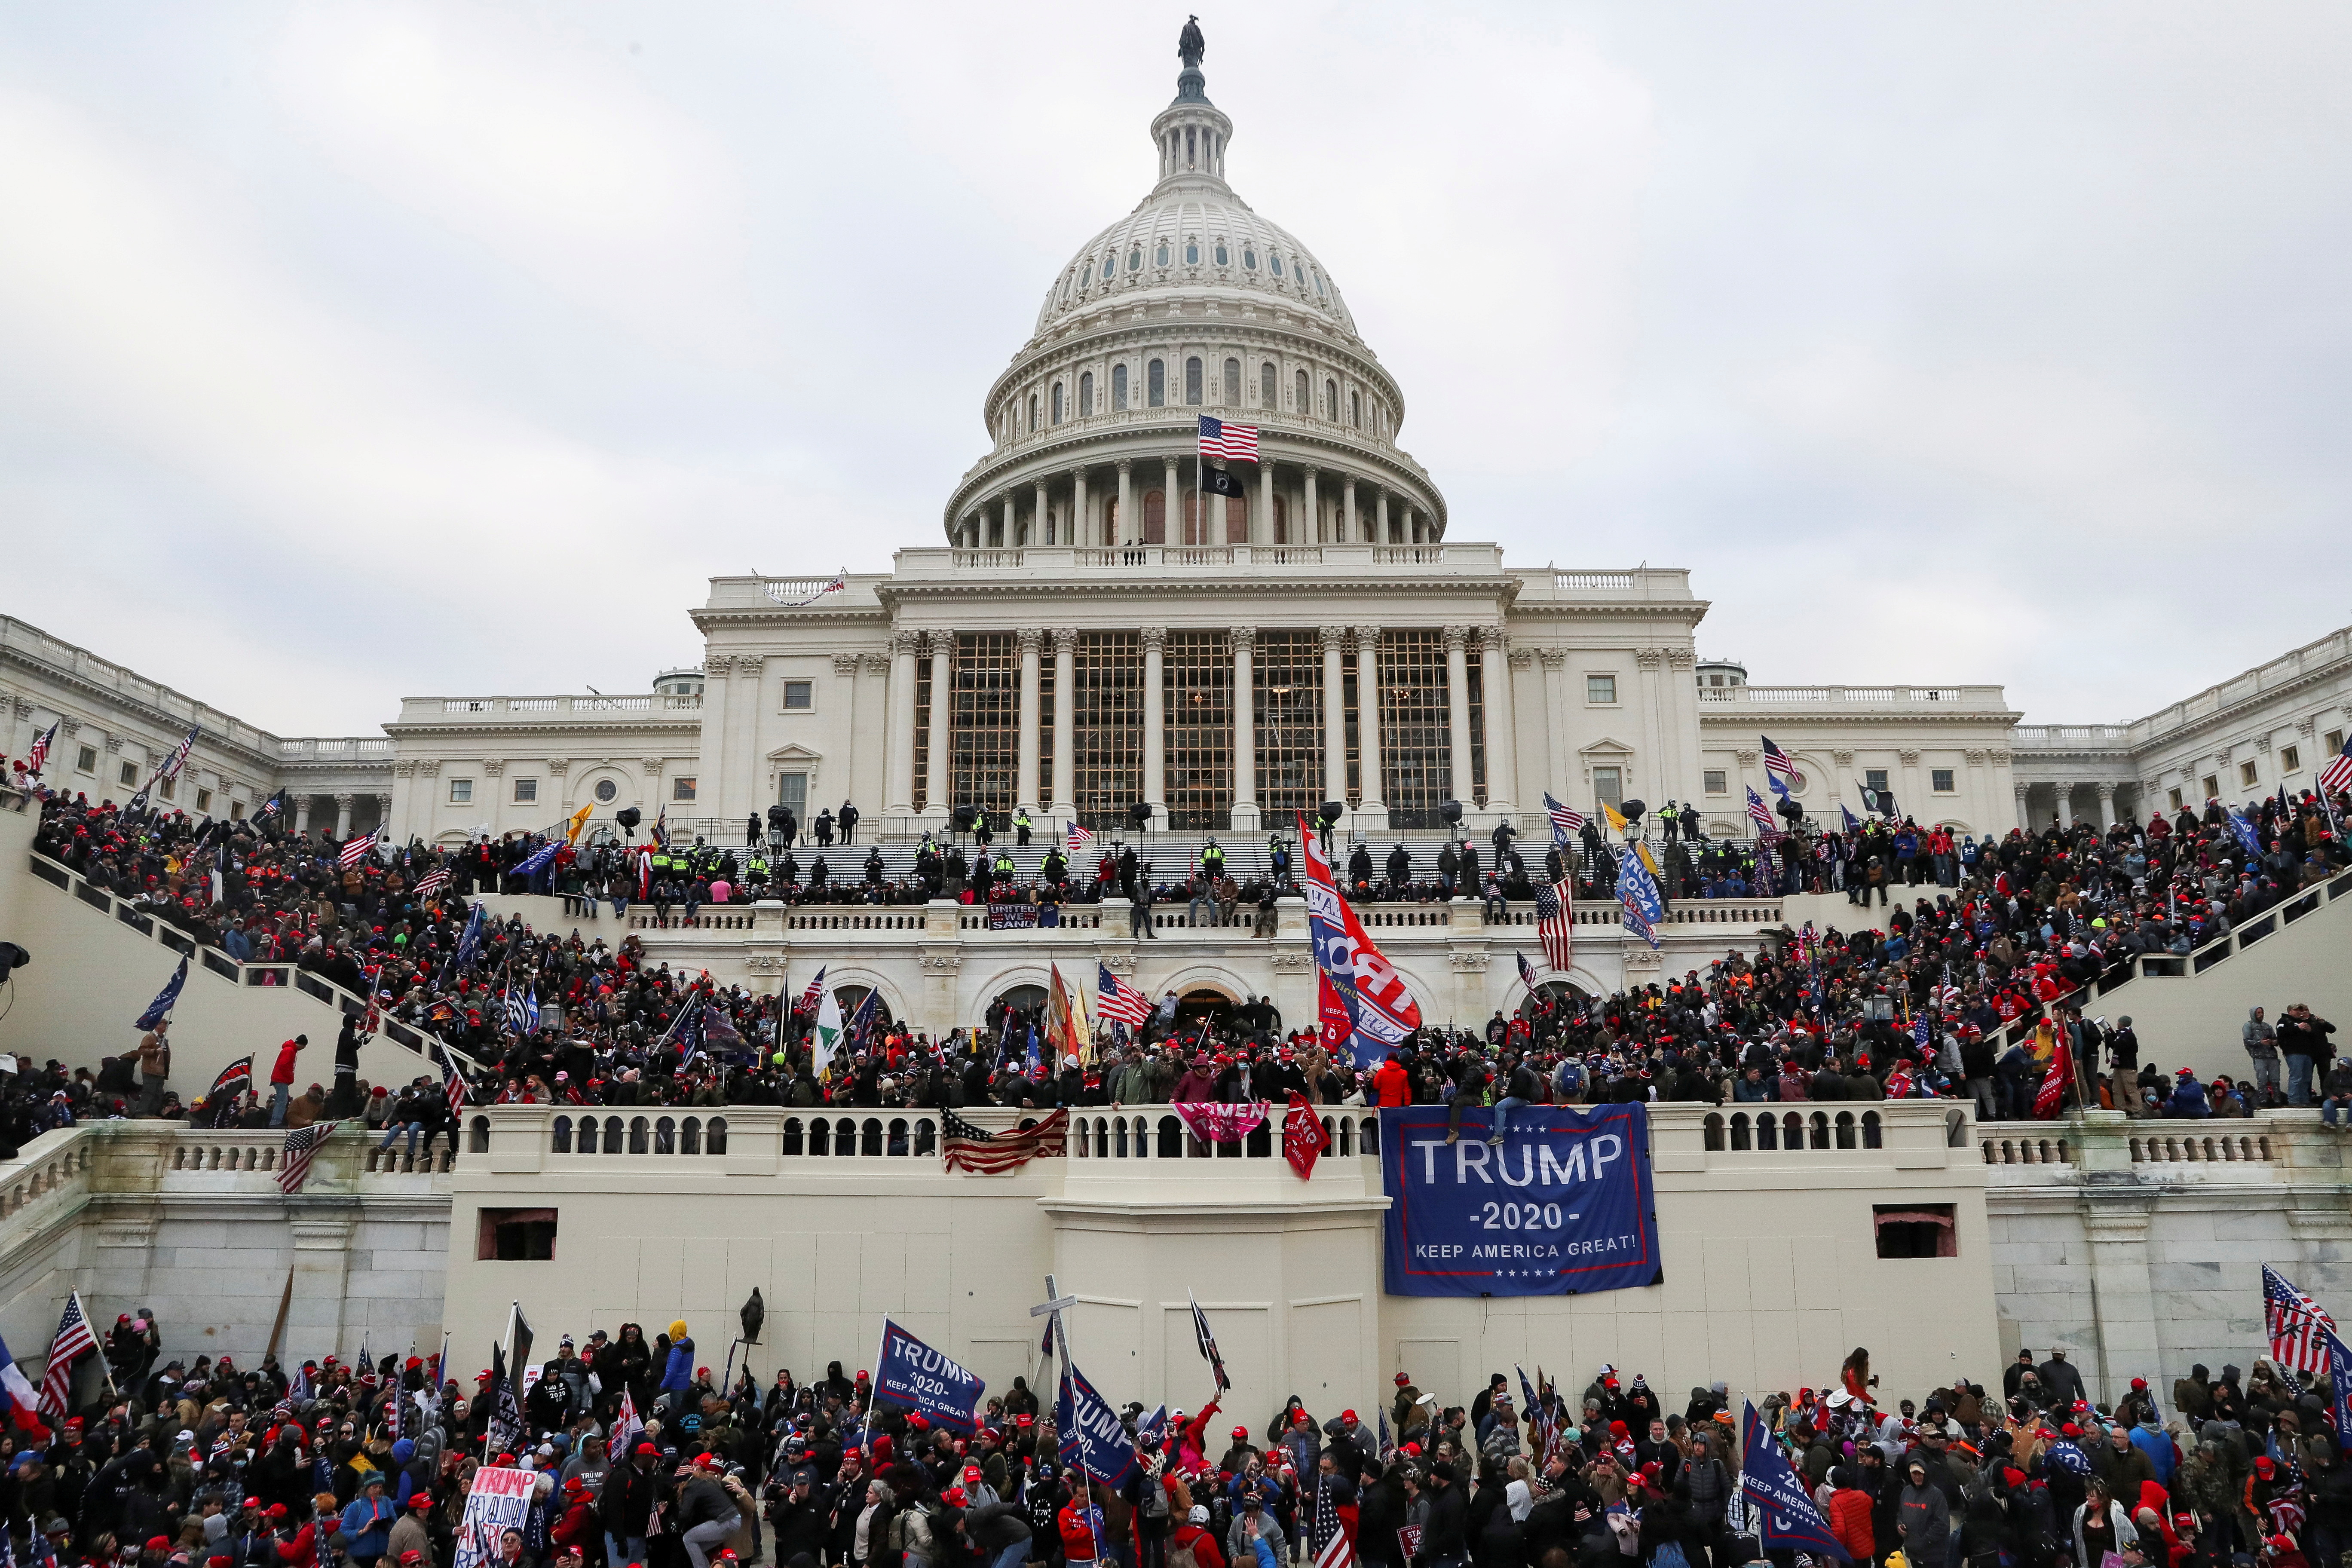 Supporters of U.S. President Donald Trump gather in front of the U.S. Capitol Building in Washington, U.S., January 6, 2021. REUTERS/Leah Millis/File Photo